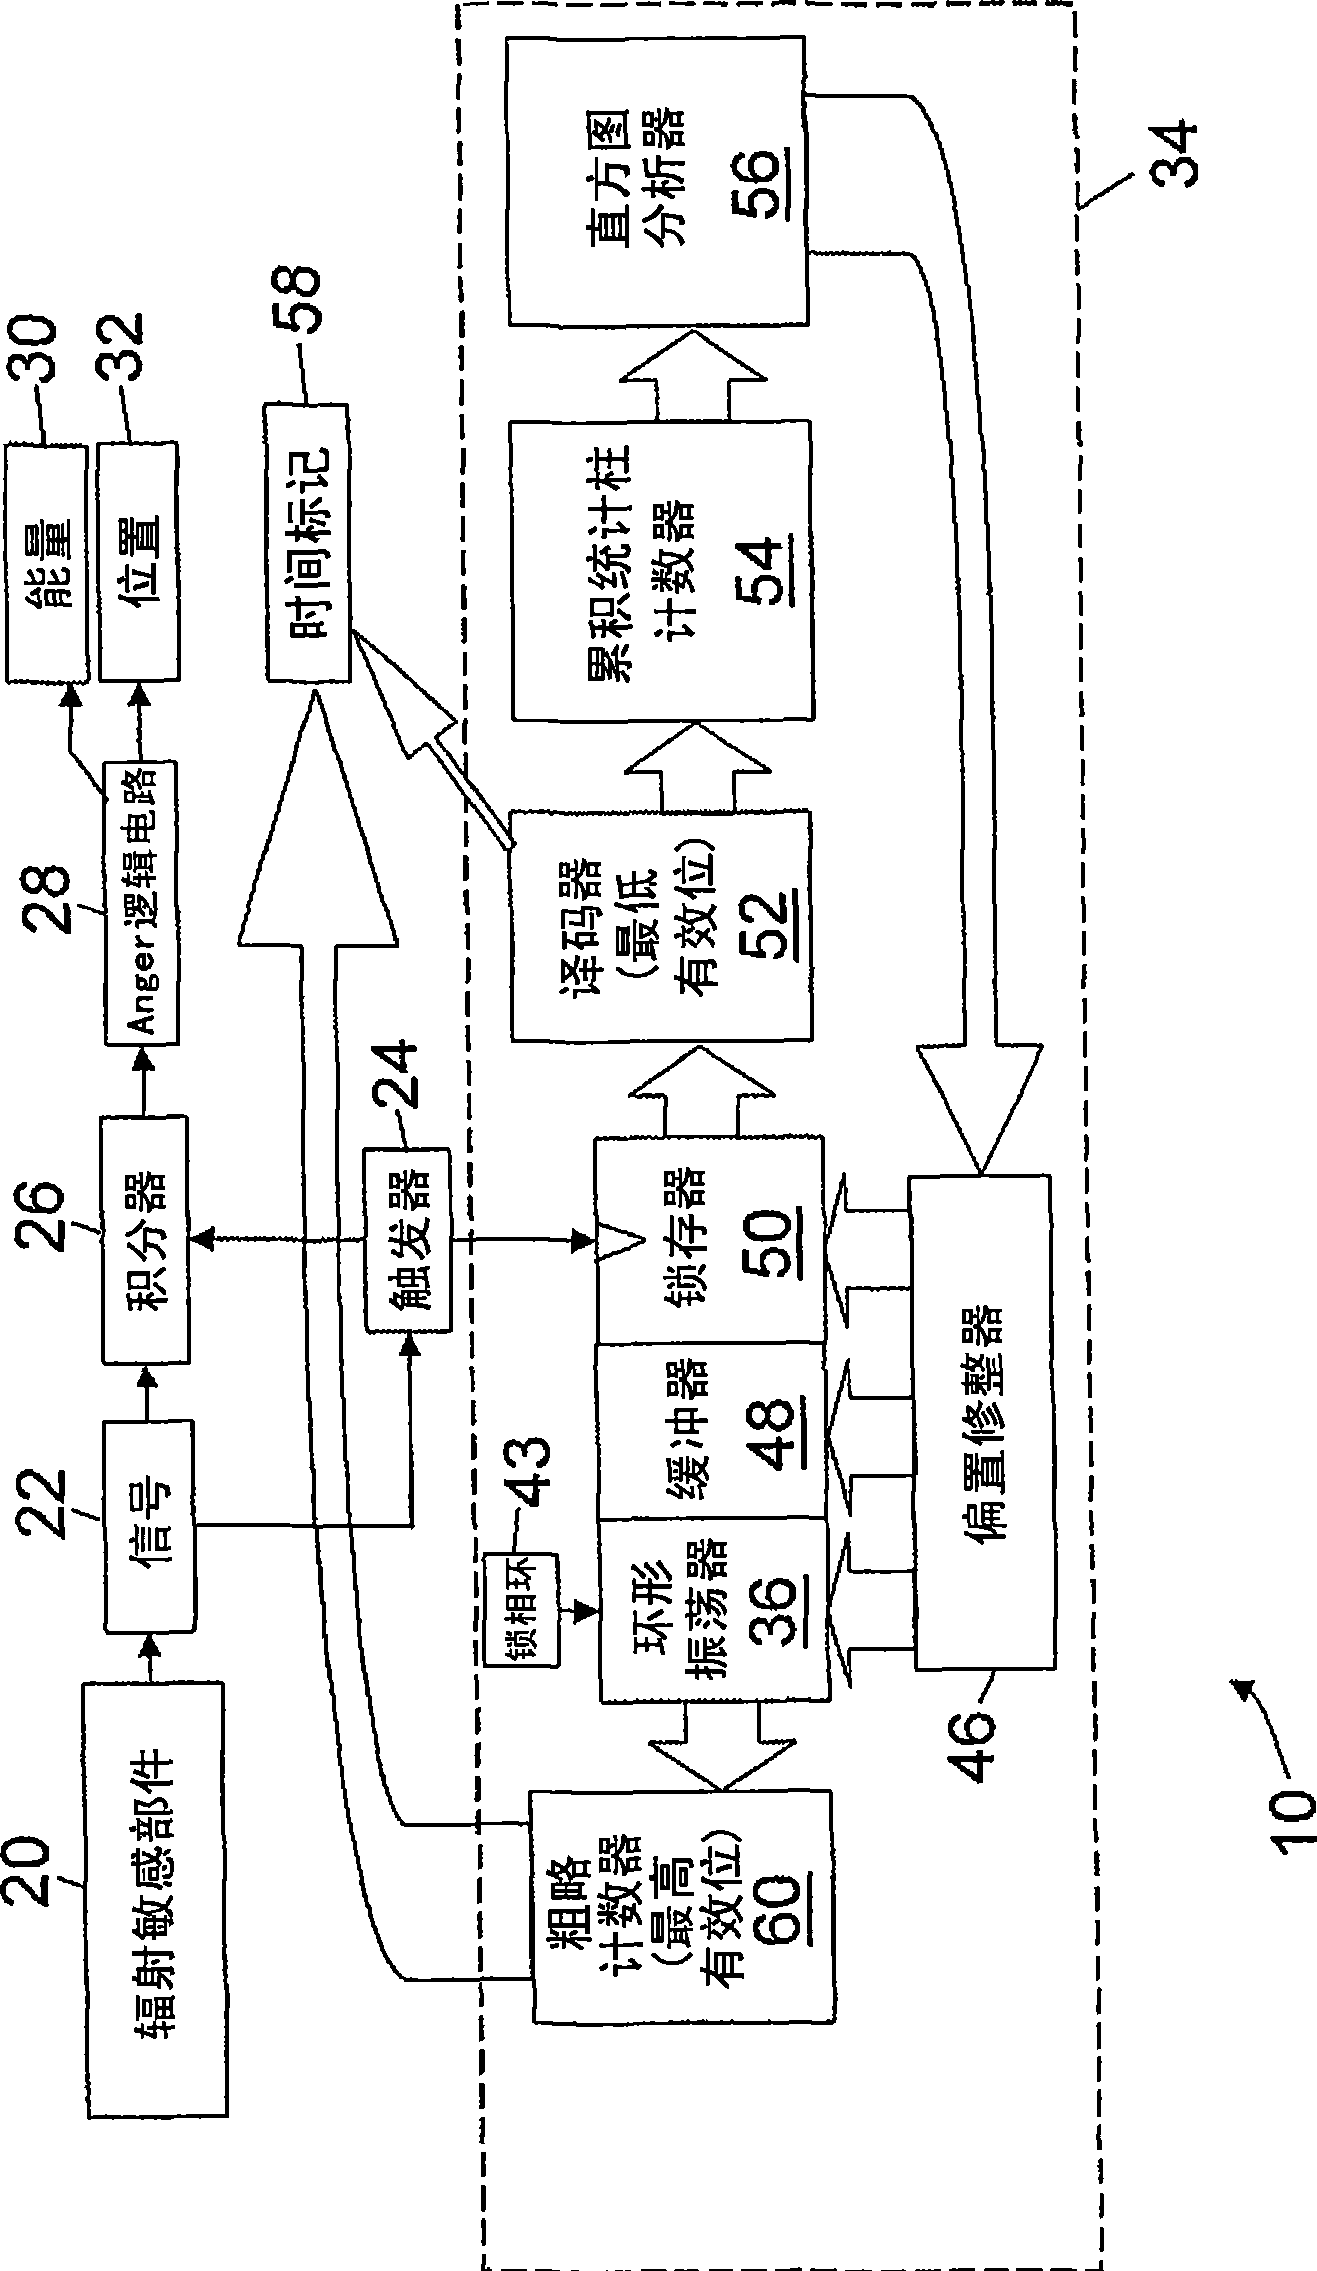 Integrated multi-channel time-to-digital converter for time-of-flight pet